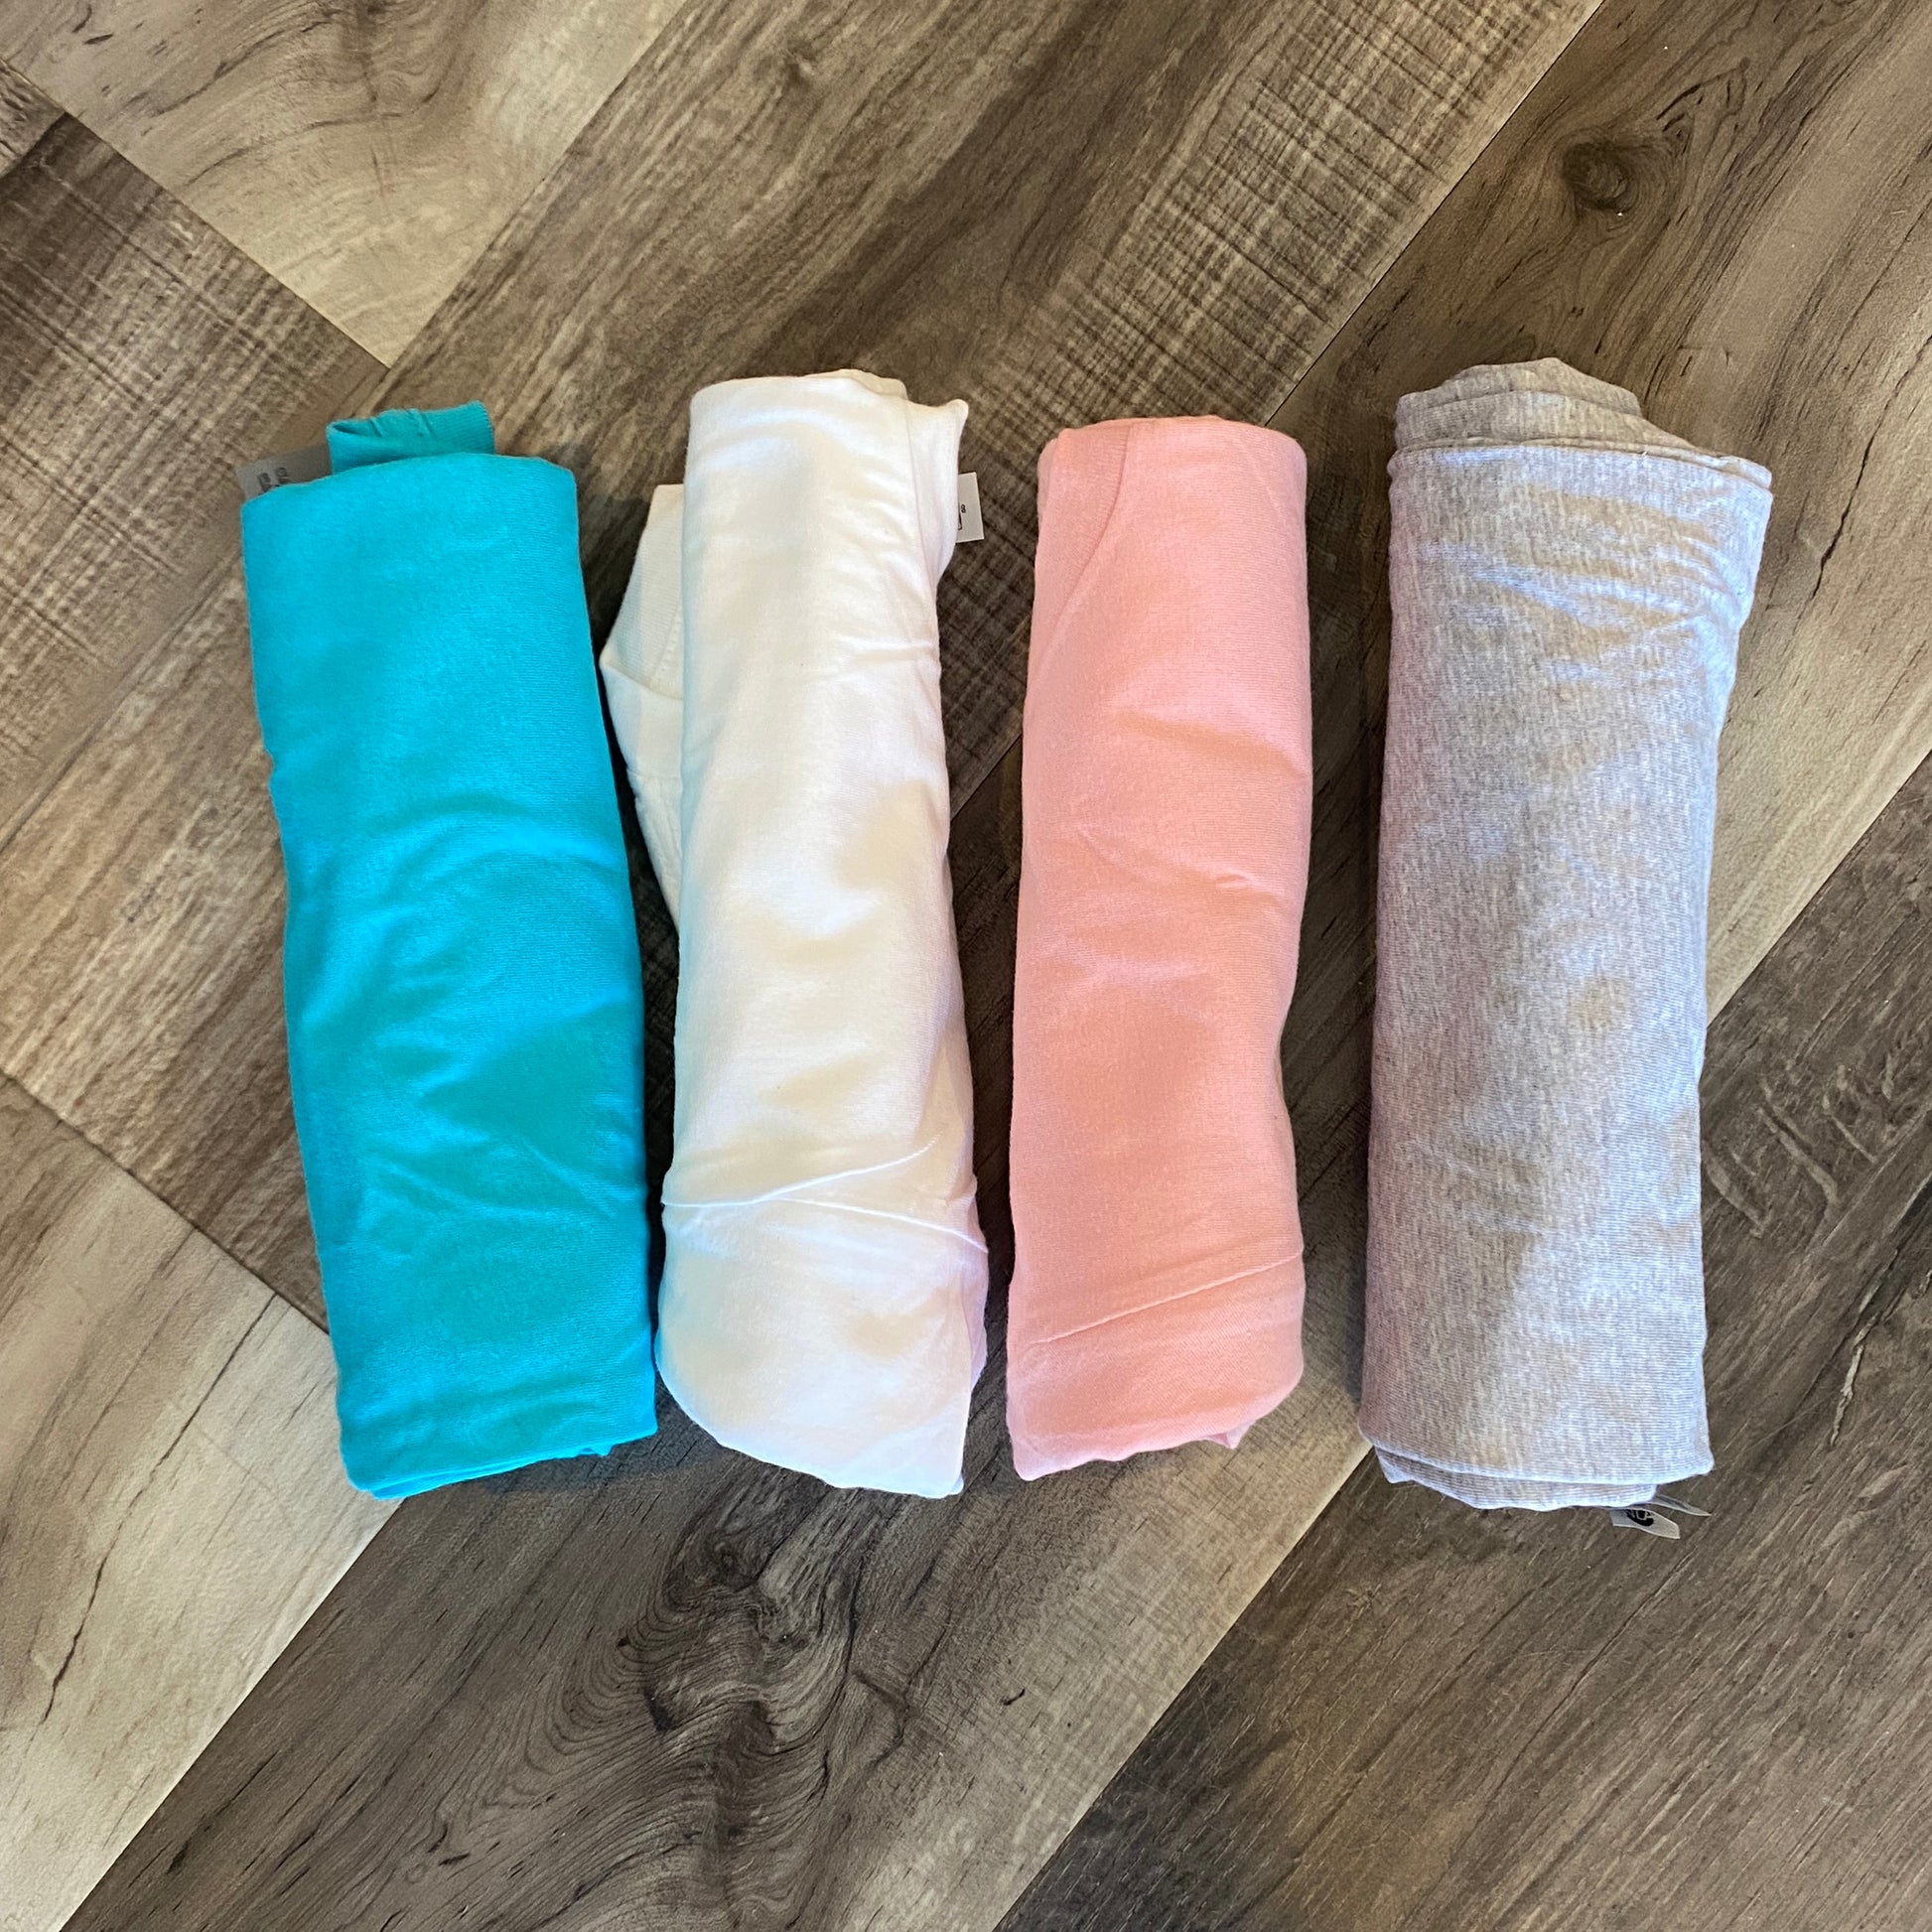 Four colors of shirts rolled up in Tahiti Blue, White, Light Pink and Heather Gray